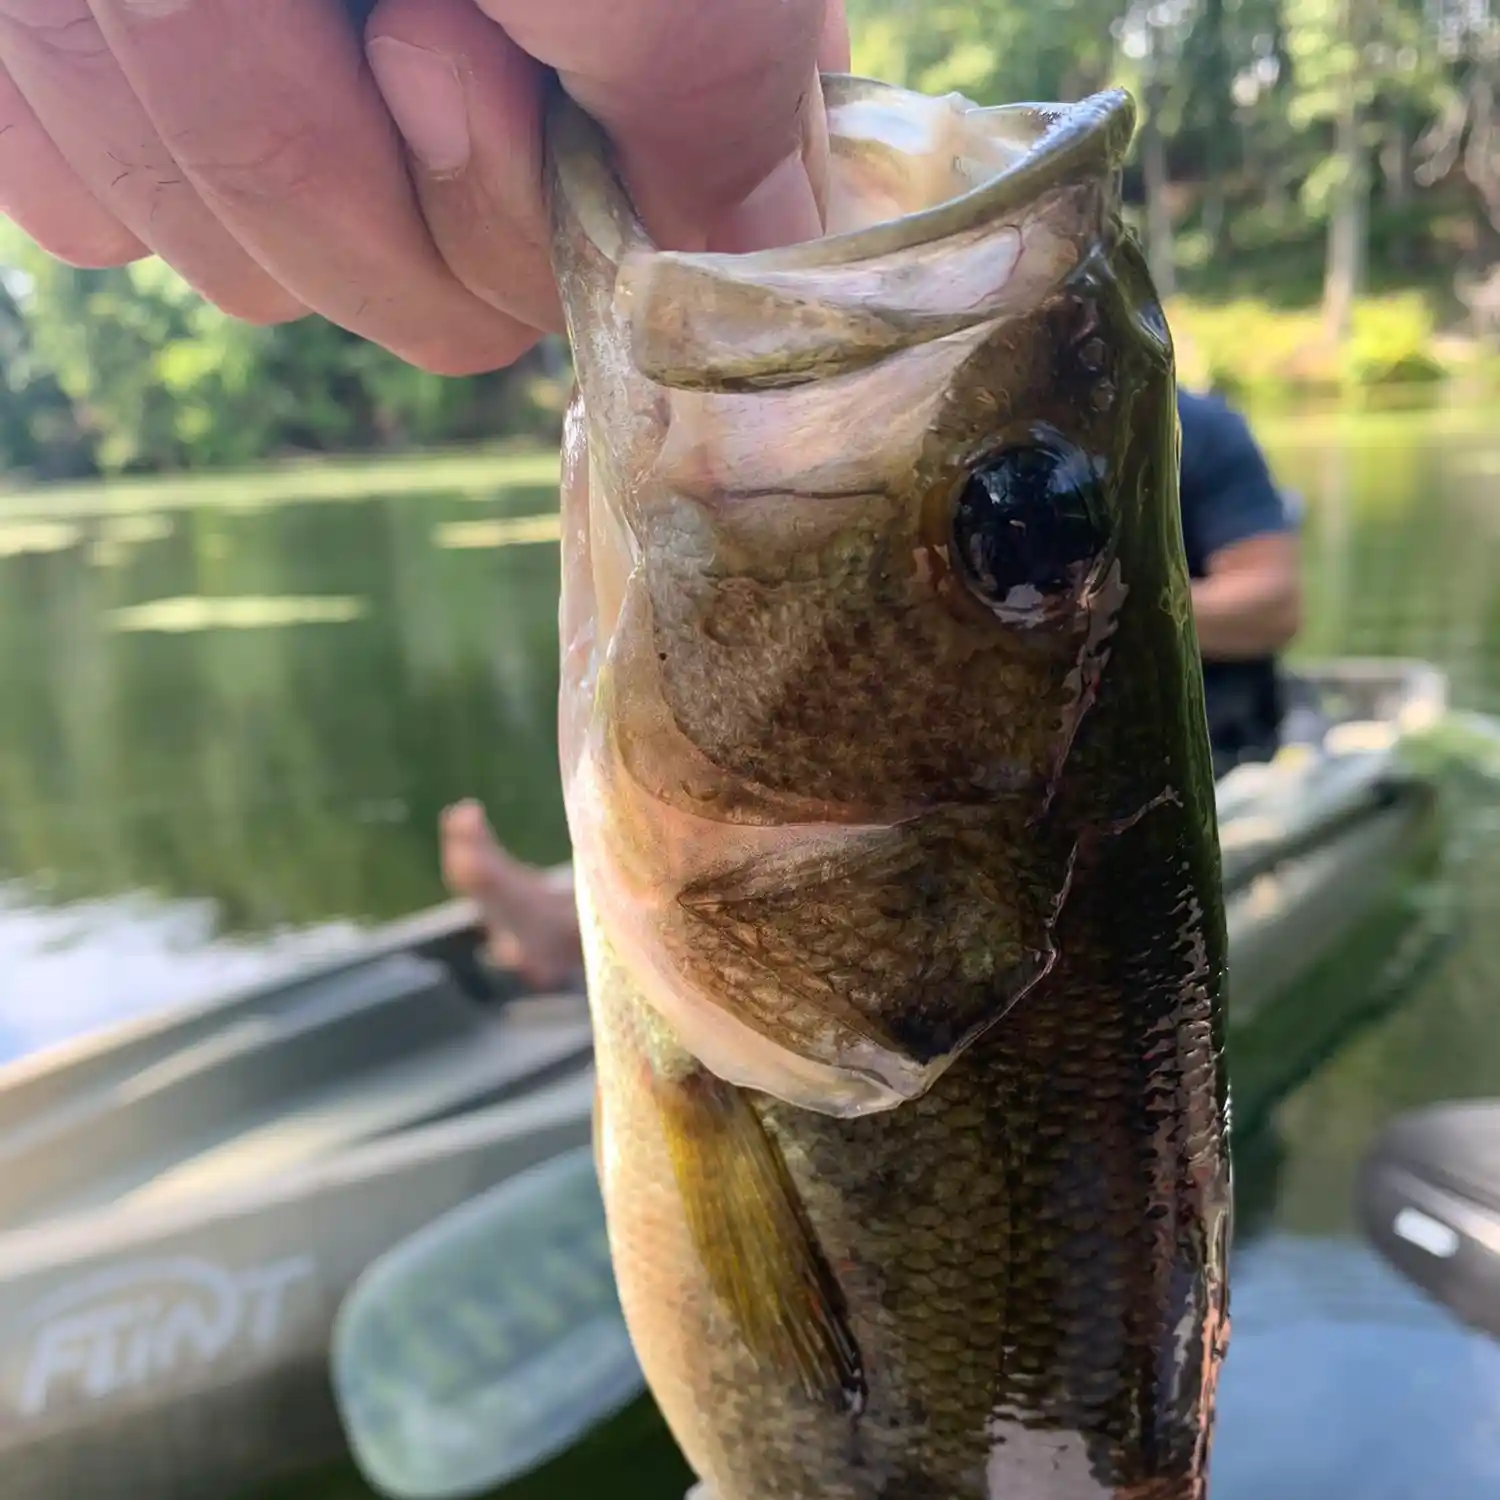 ᐅ French Brook fishing reports🎣• Manchester, CT (United States) fishing